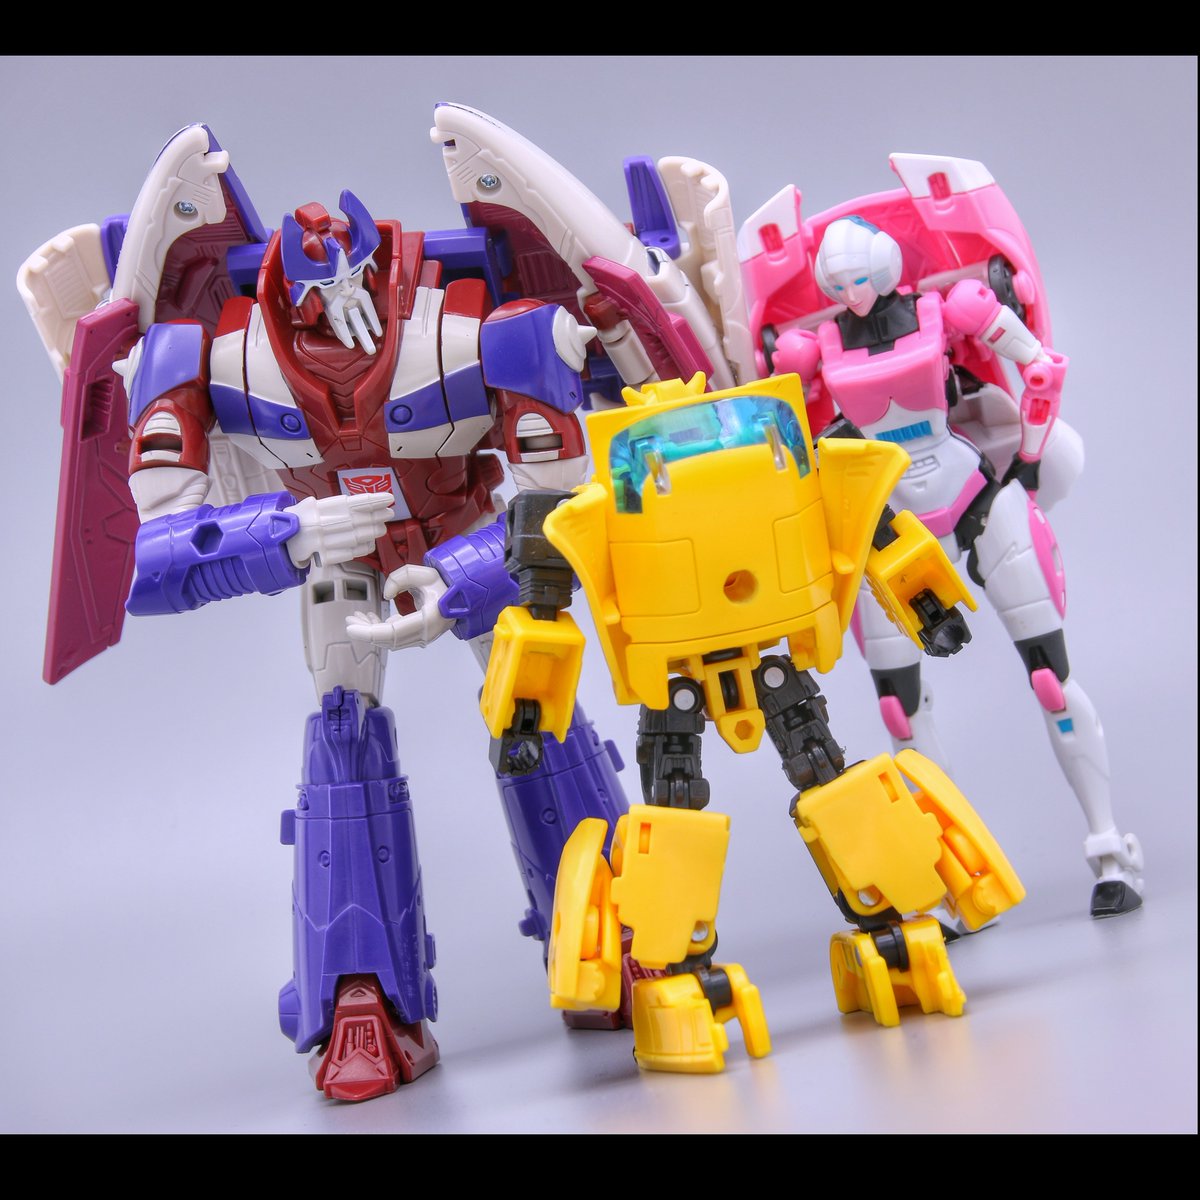 Alpha Trion, Arcee and Bee! #transformers #toyphotography